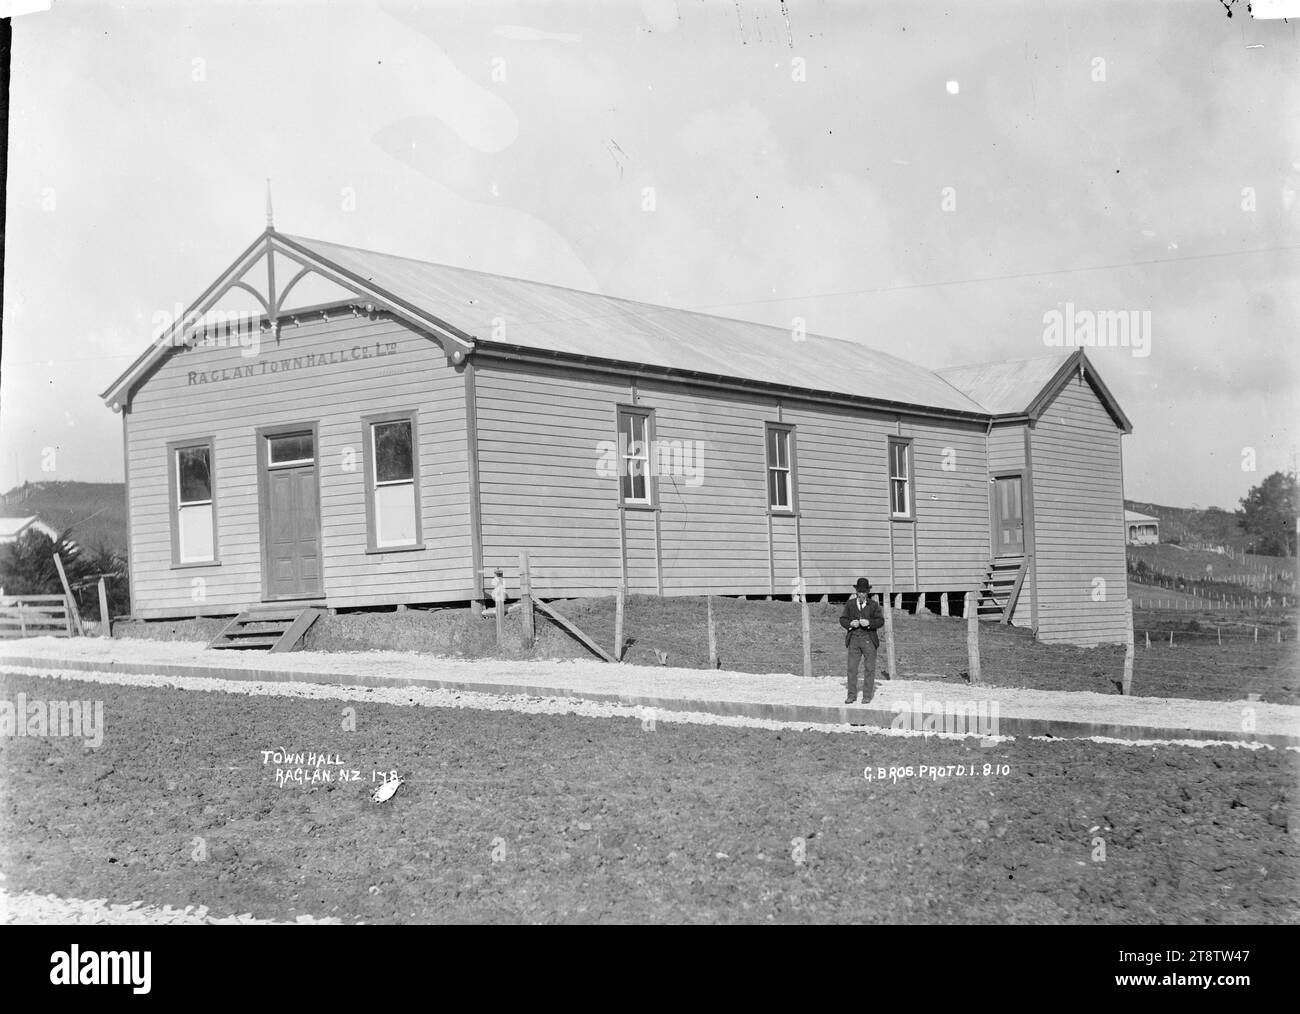 Raglan, New Zealand Town Hall, 1910, An unidentified man is standing outside the Raglan, New Zealand Town Hall, 1 August, 1910, photographed by Gilmour Brothers Stock Photo